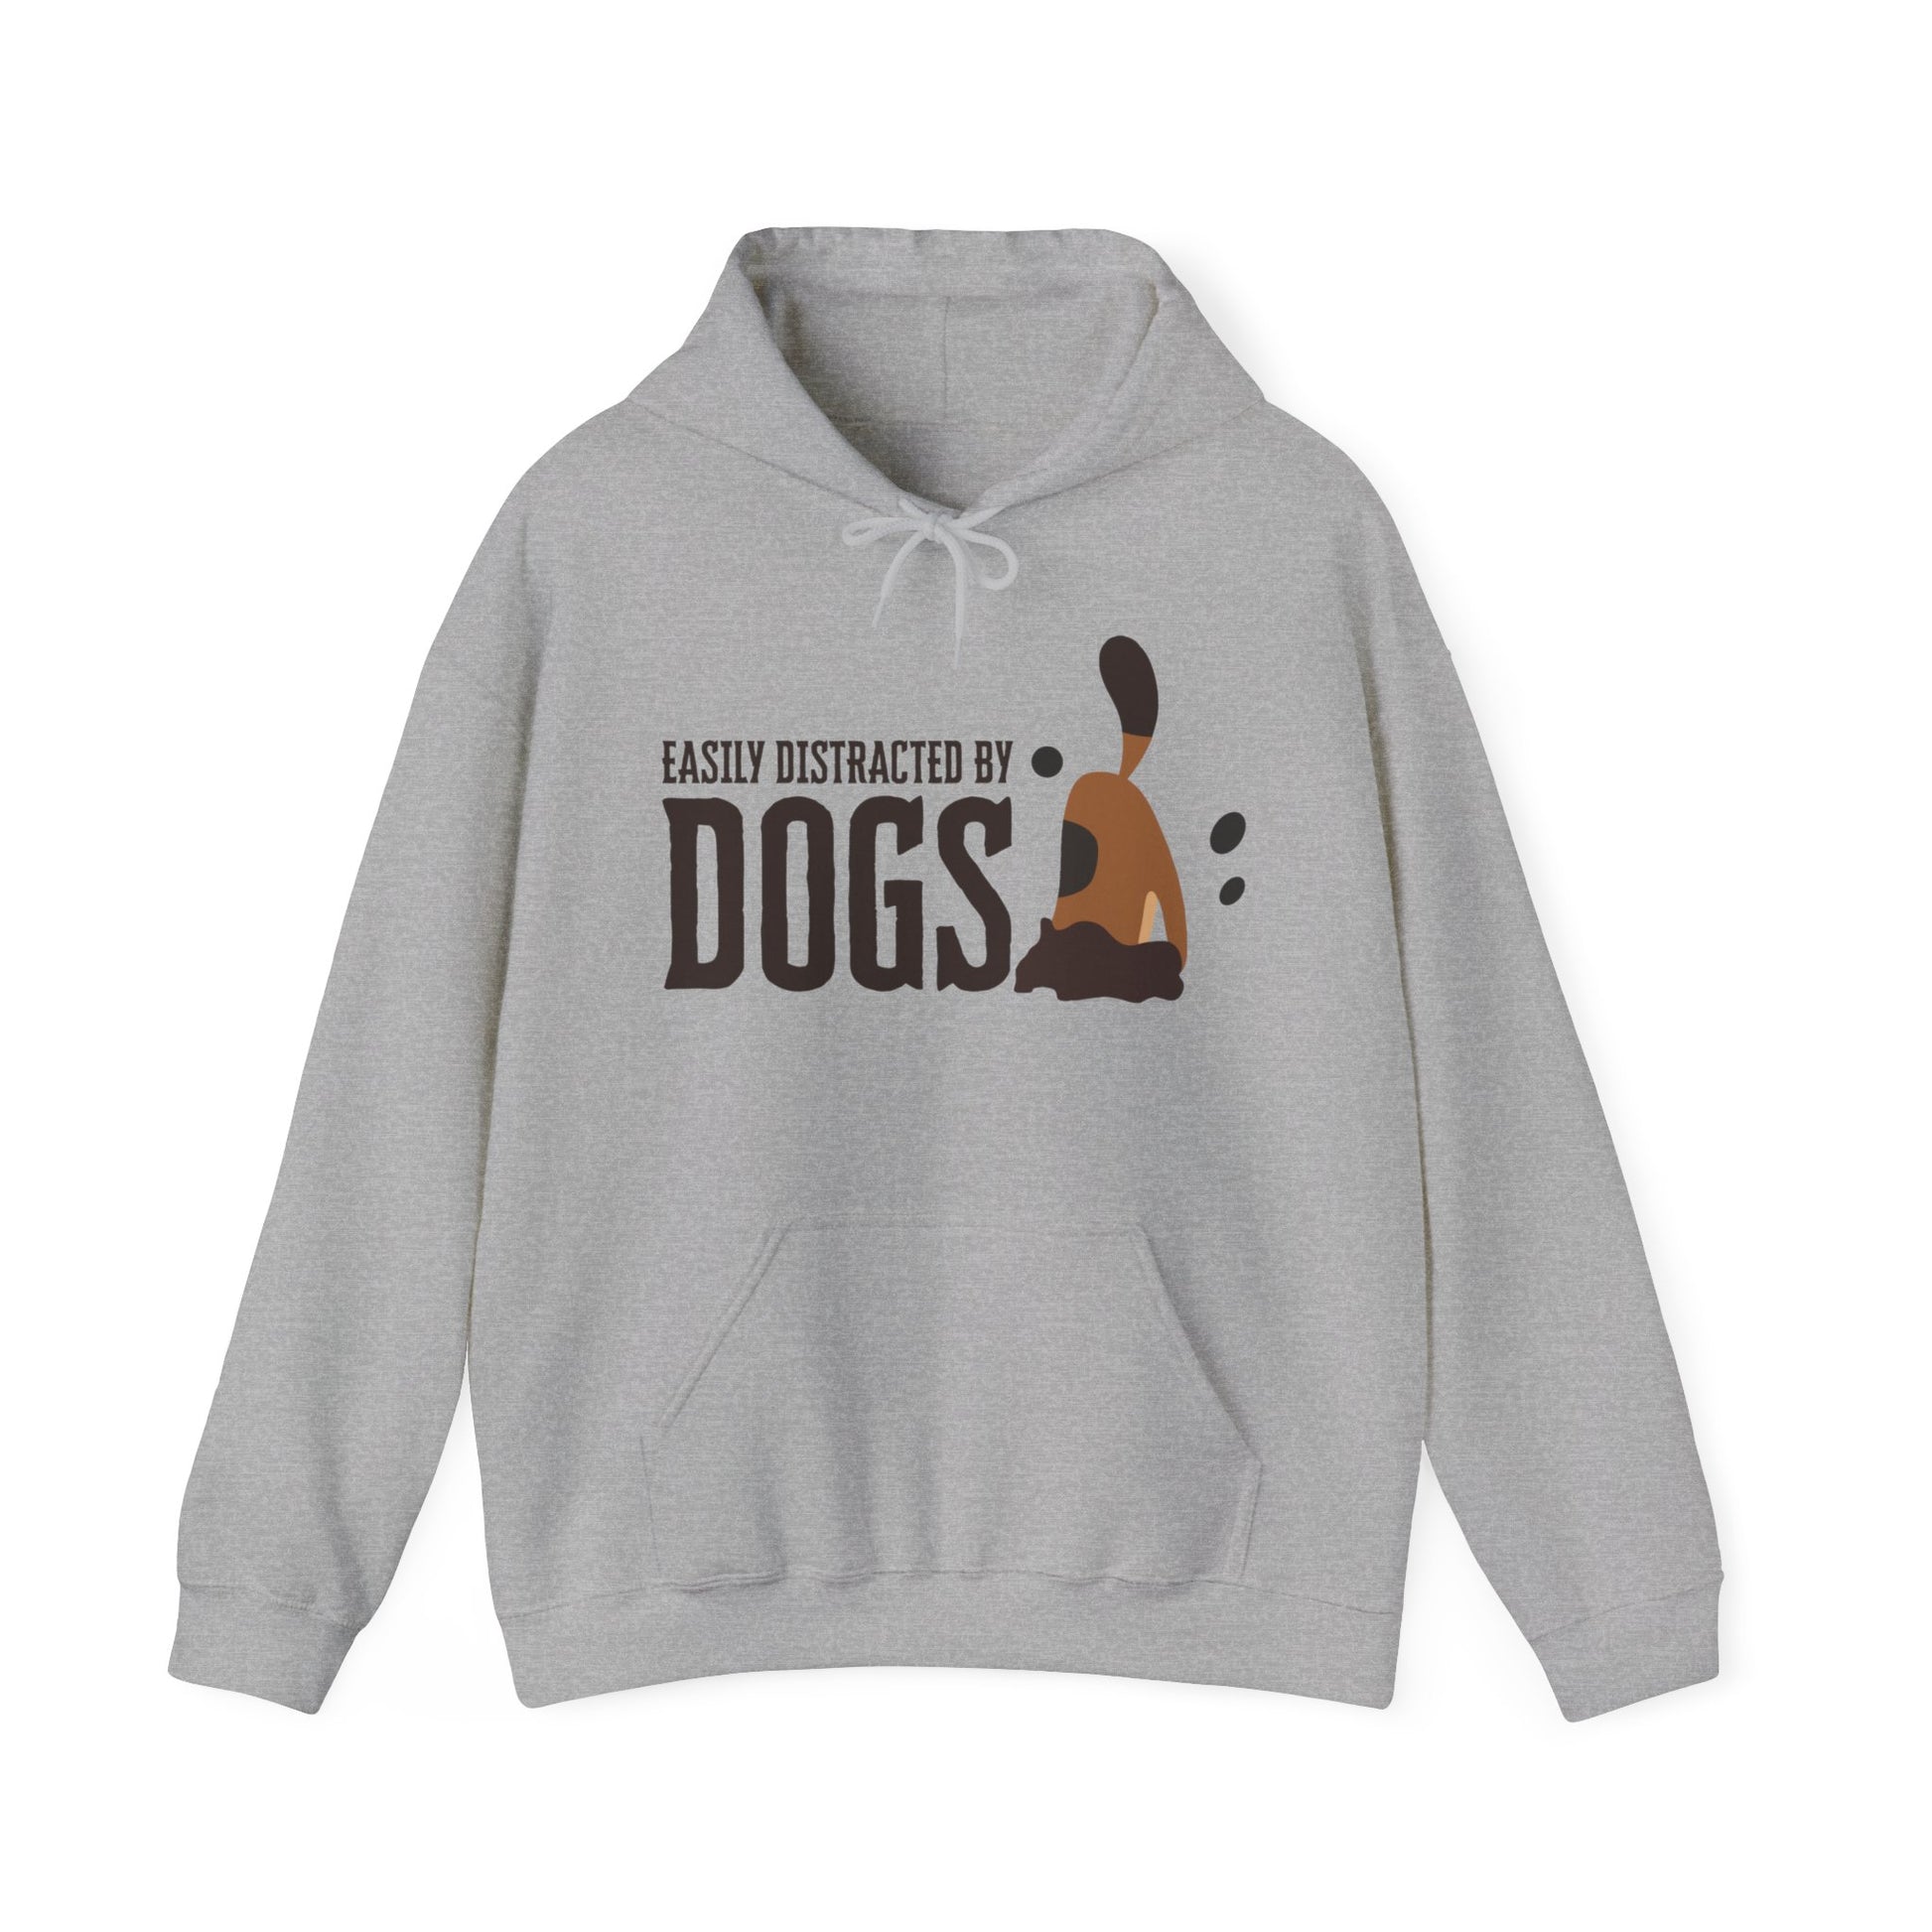 With a white backdrop behind, a ‘Dogs Pure Love, Dog Dig’ unisex sport grey hooded sweatshirt features a dog digging with the slogan ‘Easily Distracted by Dogs.’